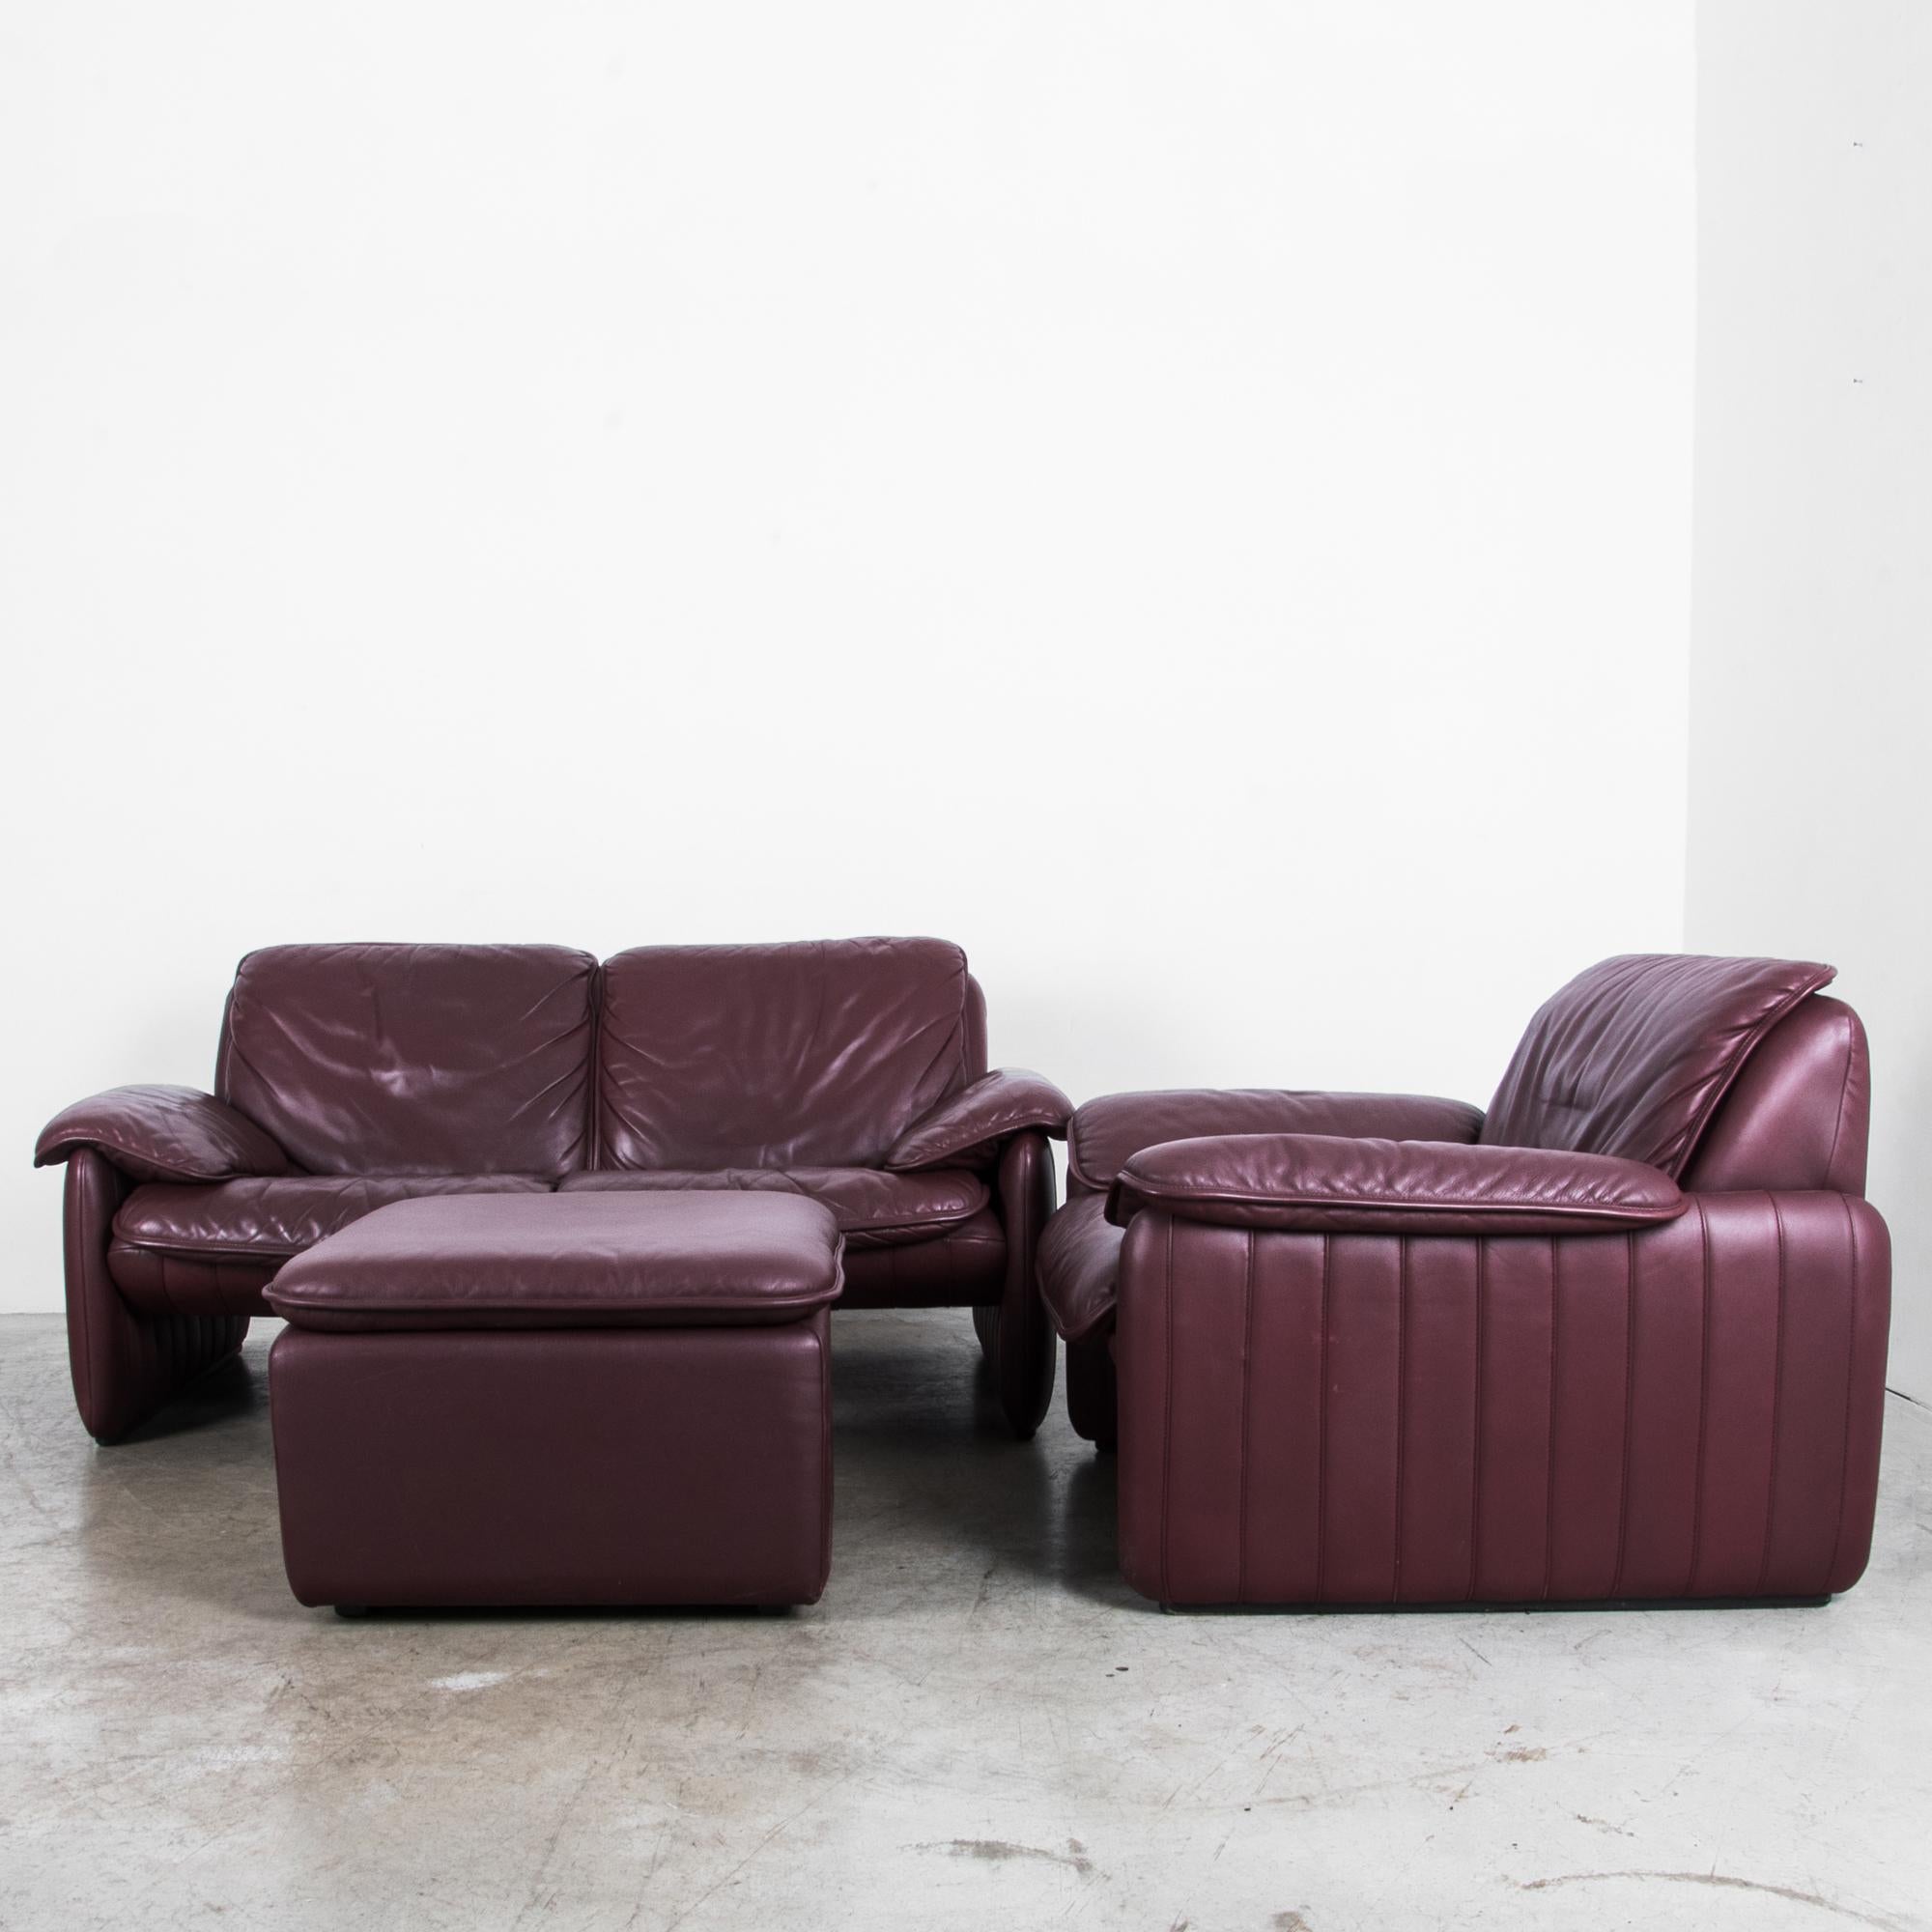 A De Sede leather sofa set featuring loveseat, armchair and ottoman. Made in the 1980s by Swiss furniture maker De Sede, known both for their leather craftsmanship and their contemporary designs. This sofa set features a rounded, modern silhouette.